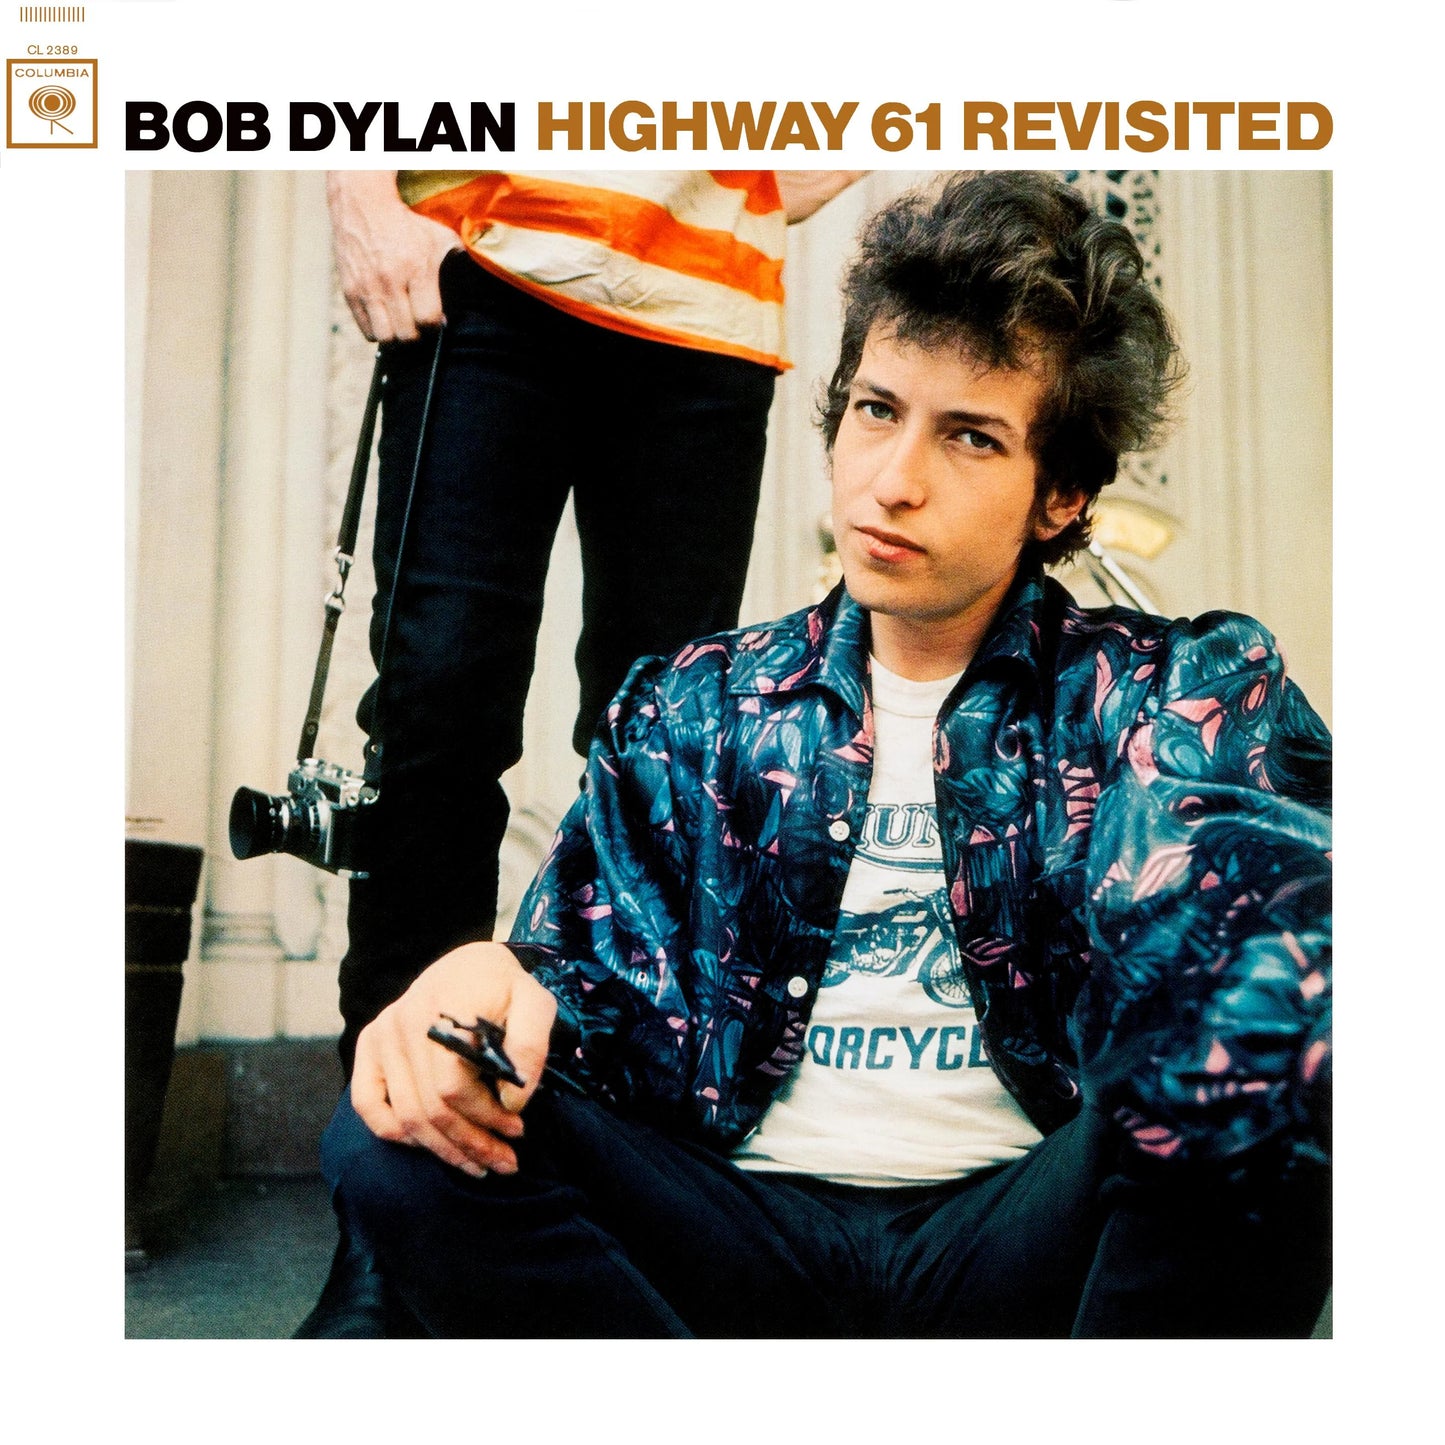 Bob Dylan - Highway 61 Revisited | Buy the Vinyl LP from Flying Nun Records